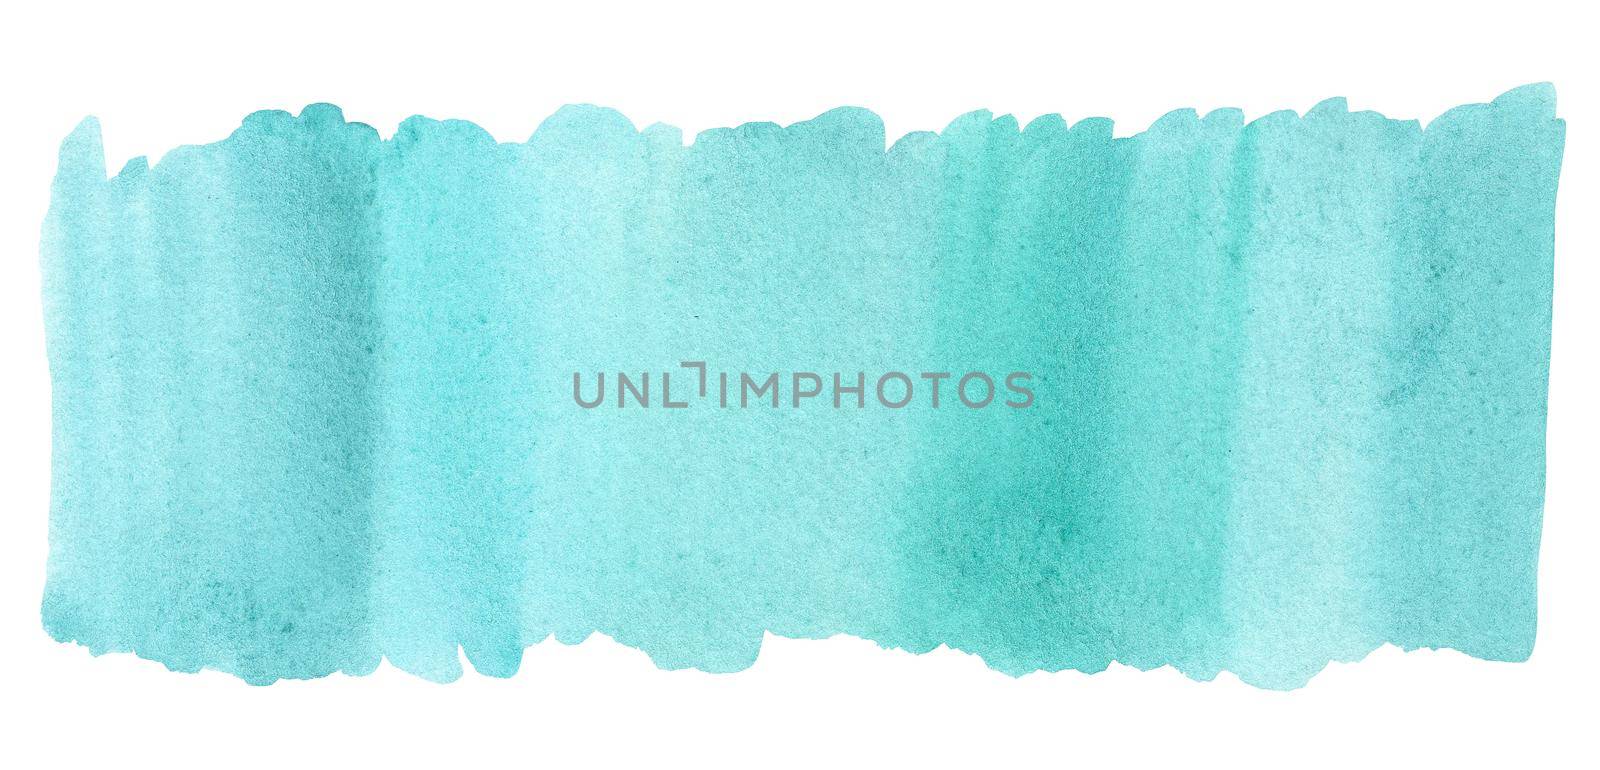 Watercolor turquoise splash isolated on white background. Blue gradient design element